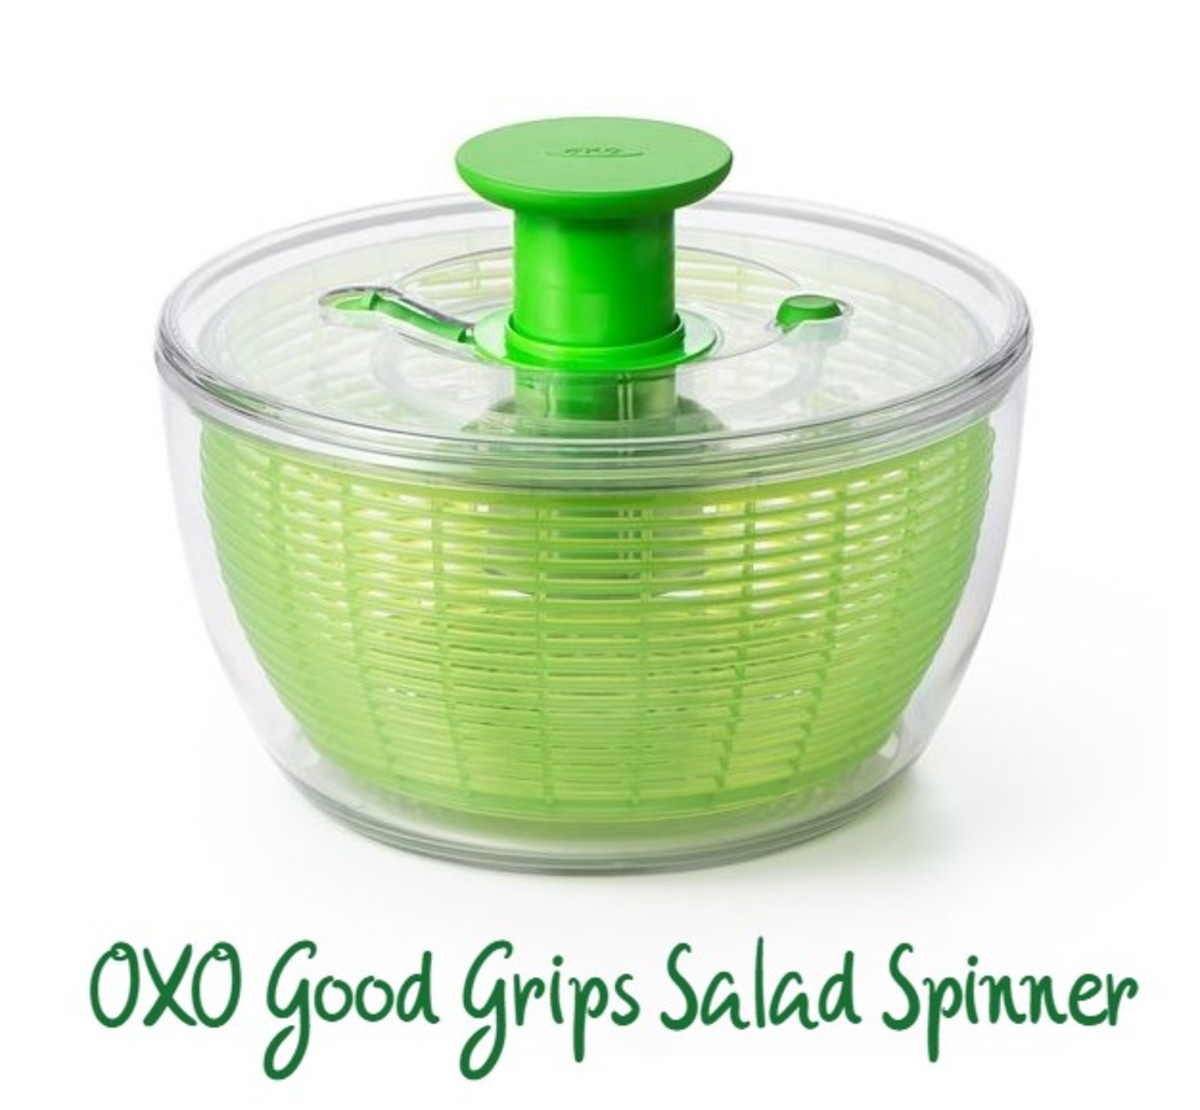 Fruit Shake And Drain Basket Easy To Use Salad Spinners with Bowl Salad Spinner Manual Lettuce Spinner Home Kitchen Salad Sink 